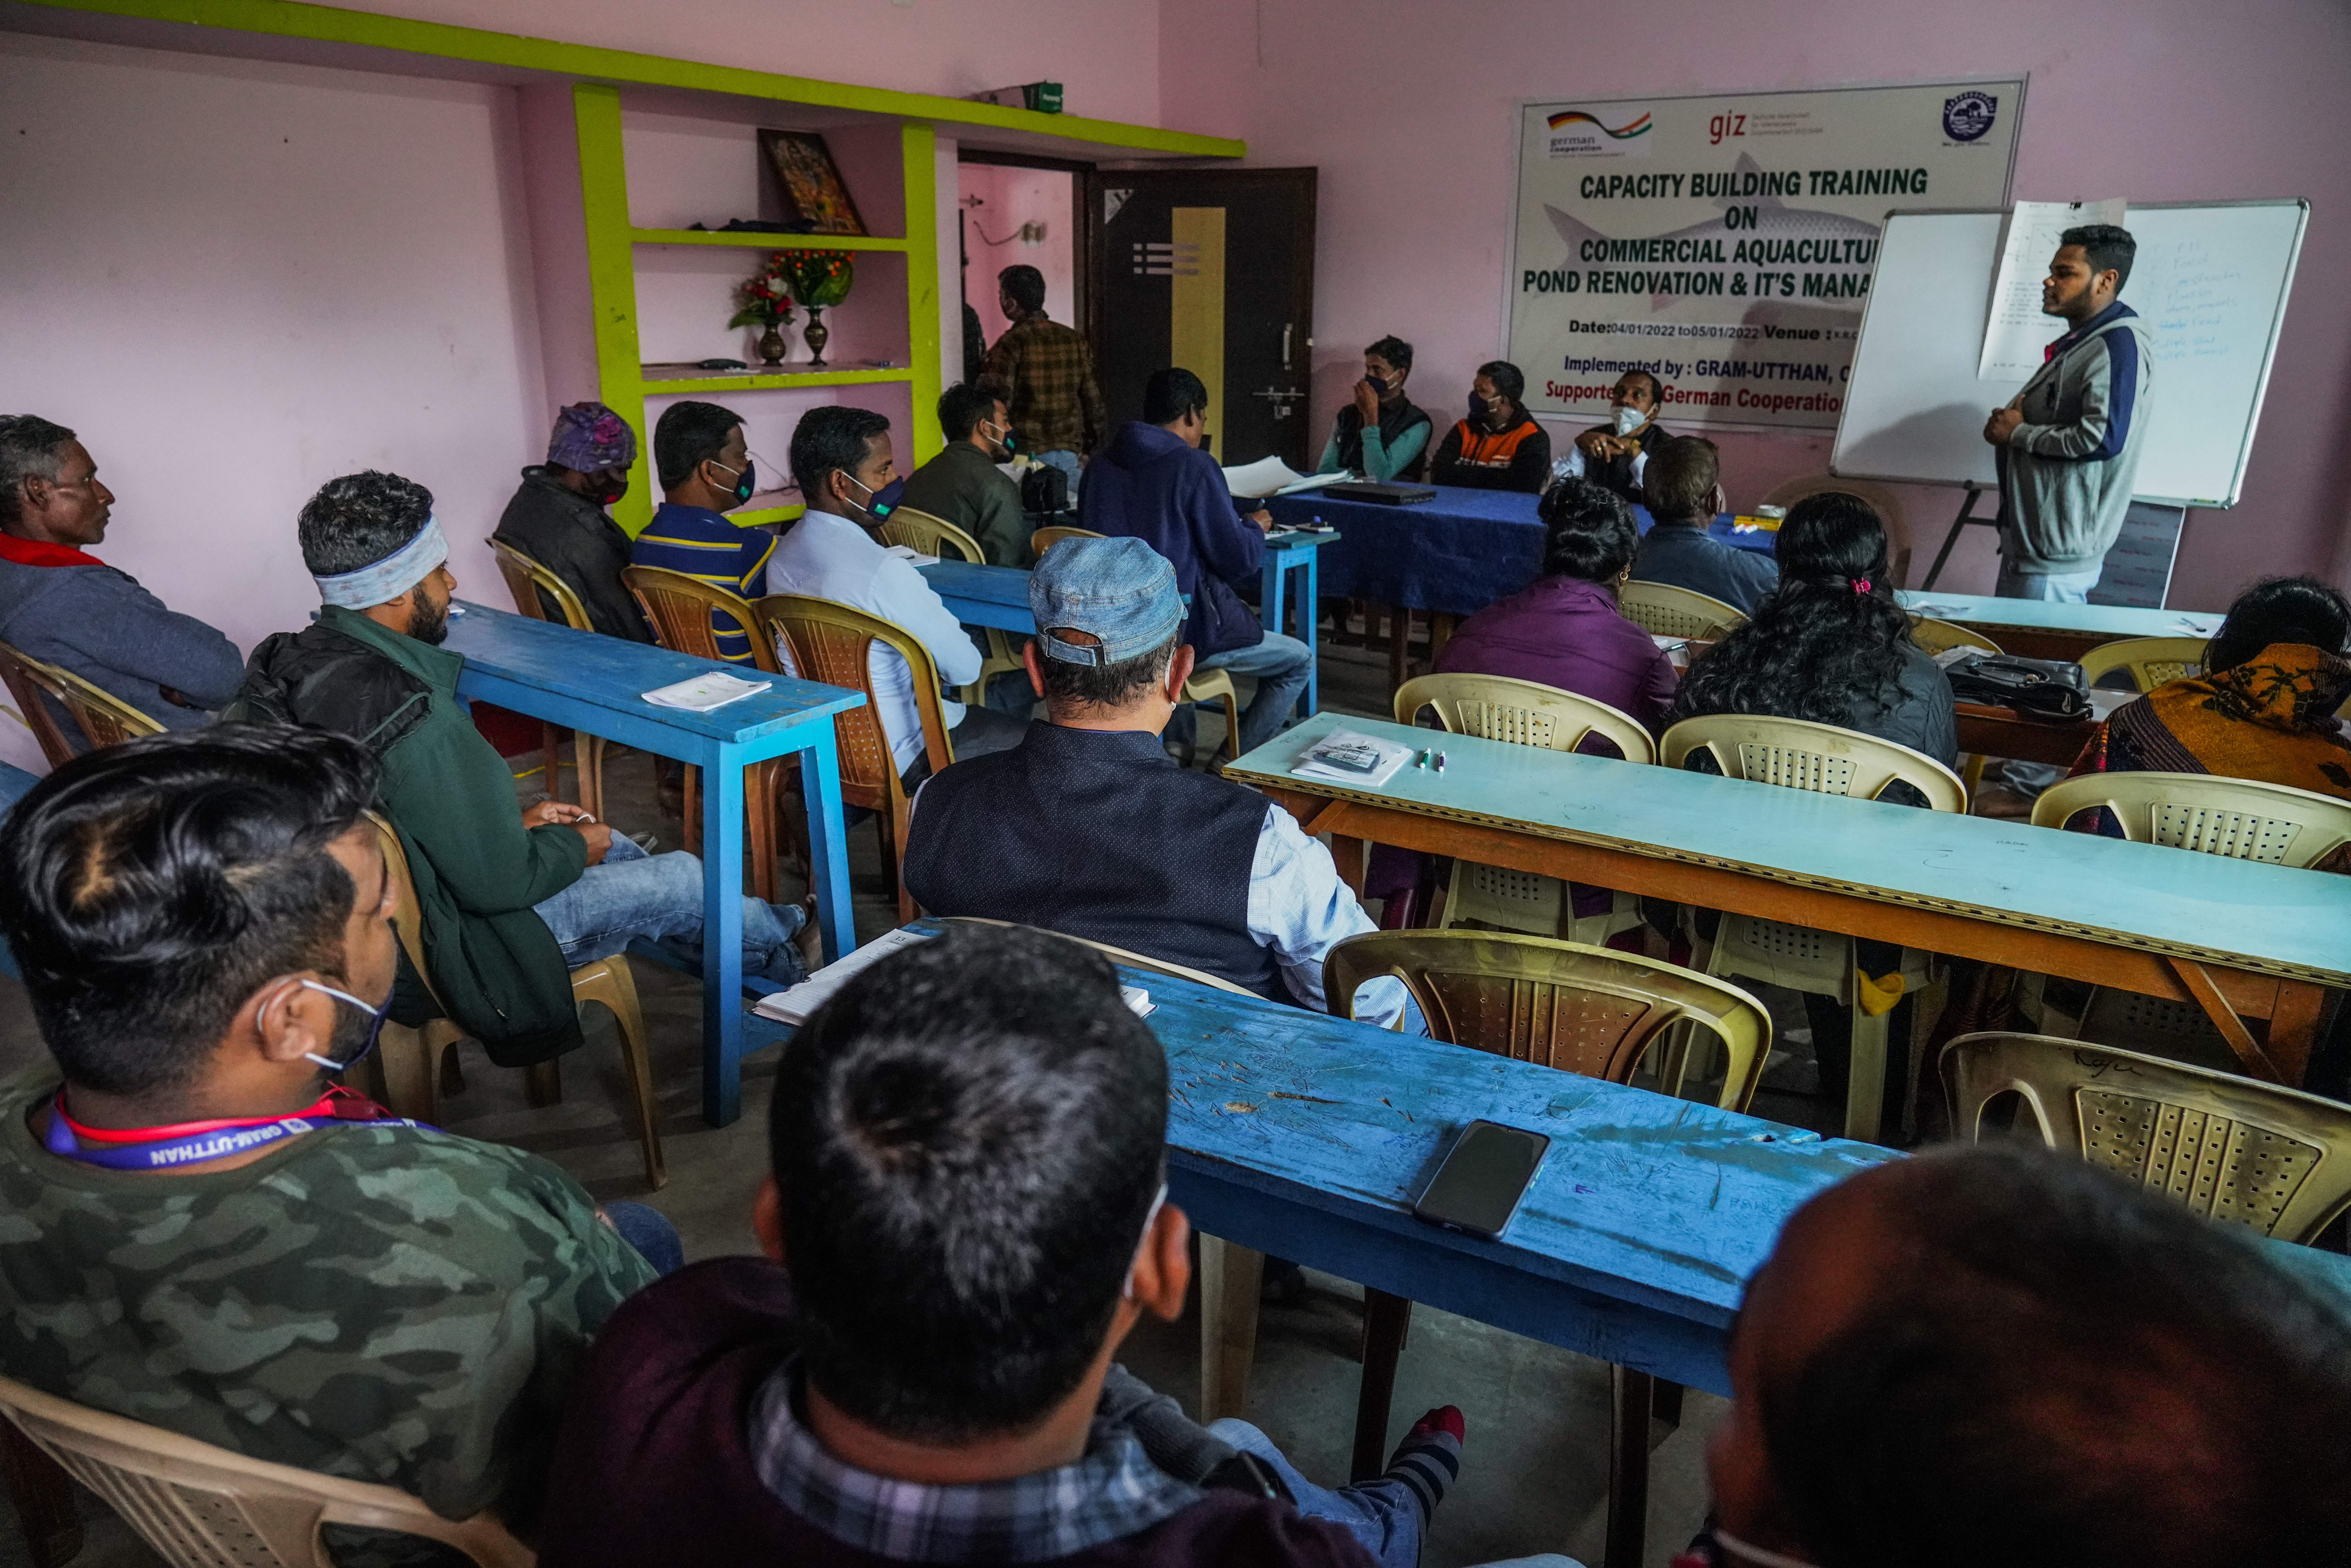 Aquaculture farmer sitting in class room attending a capacity building training on sustainable aquaculutre